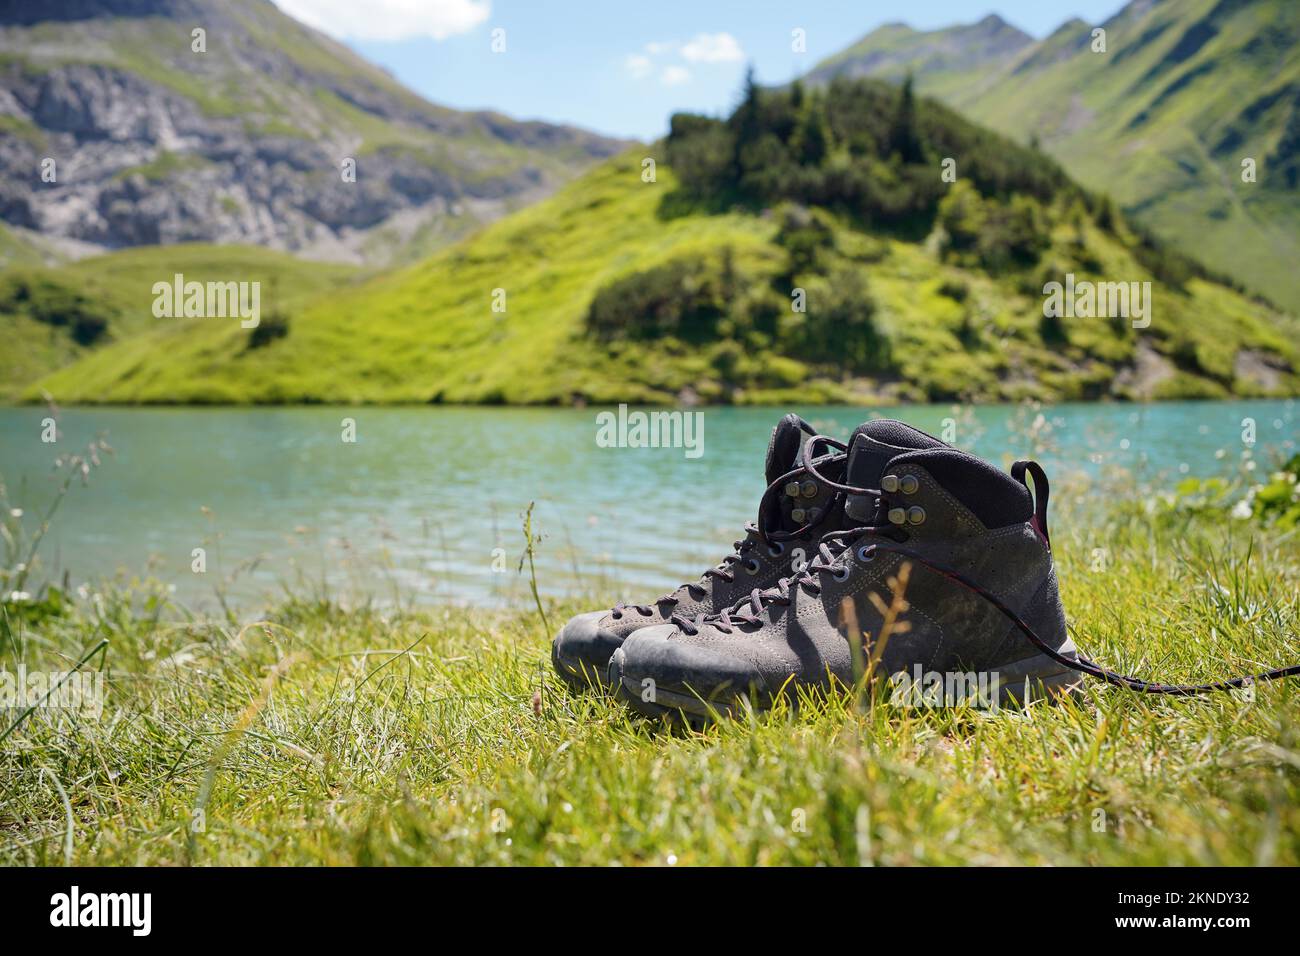 Pair of hiking boots at mountain lake 'Schrecksee' in the german alps. Stock Photo